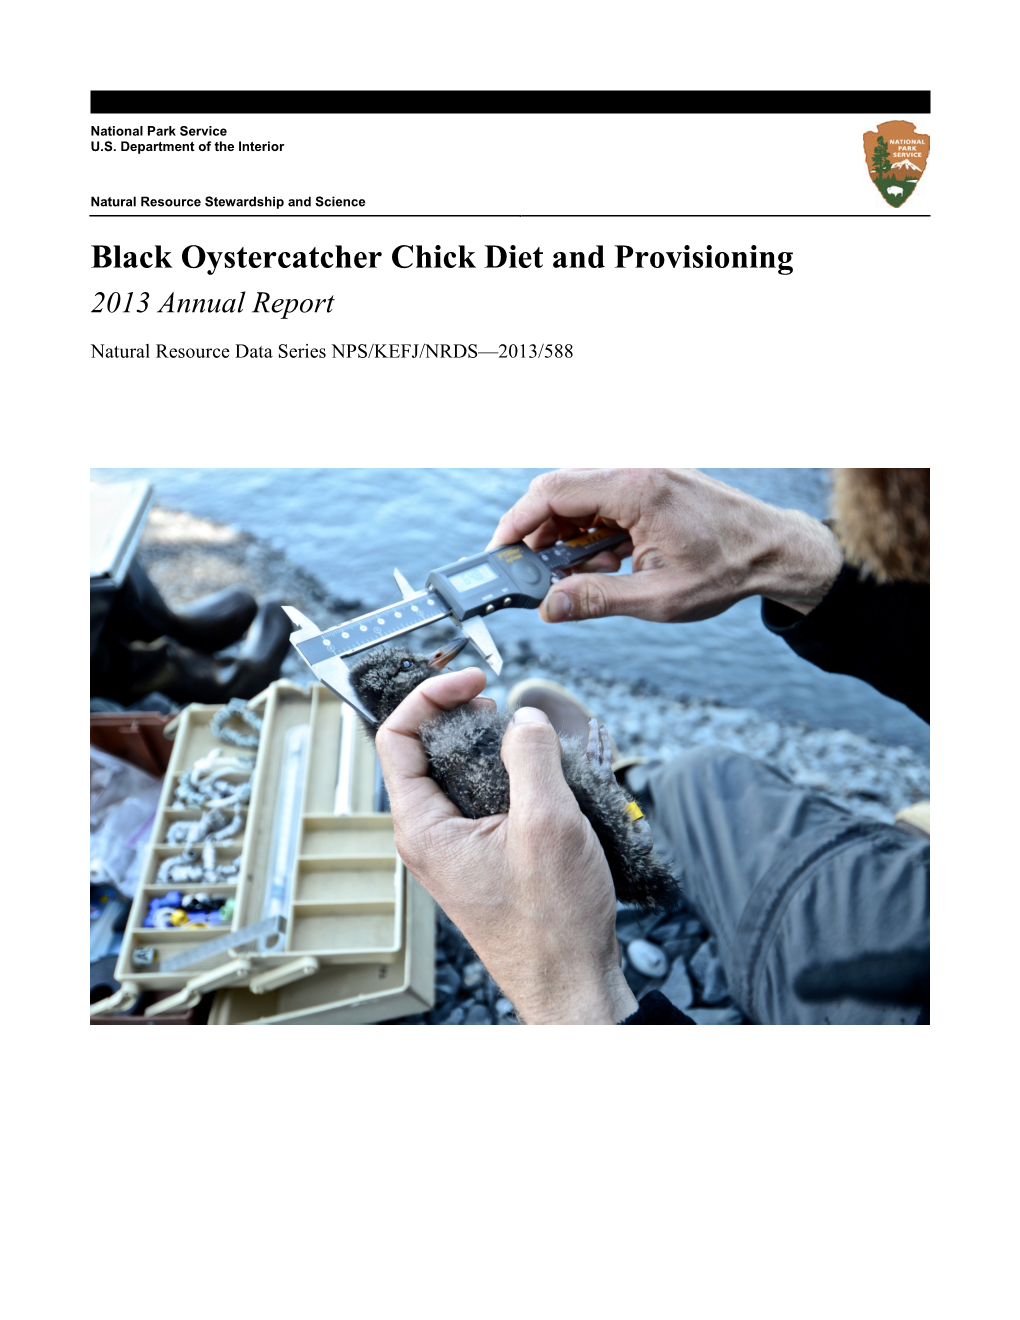 Black Oystercatcher Chick Diet and Provisioning 2013 Annual Report